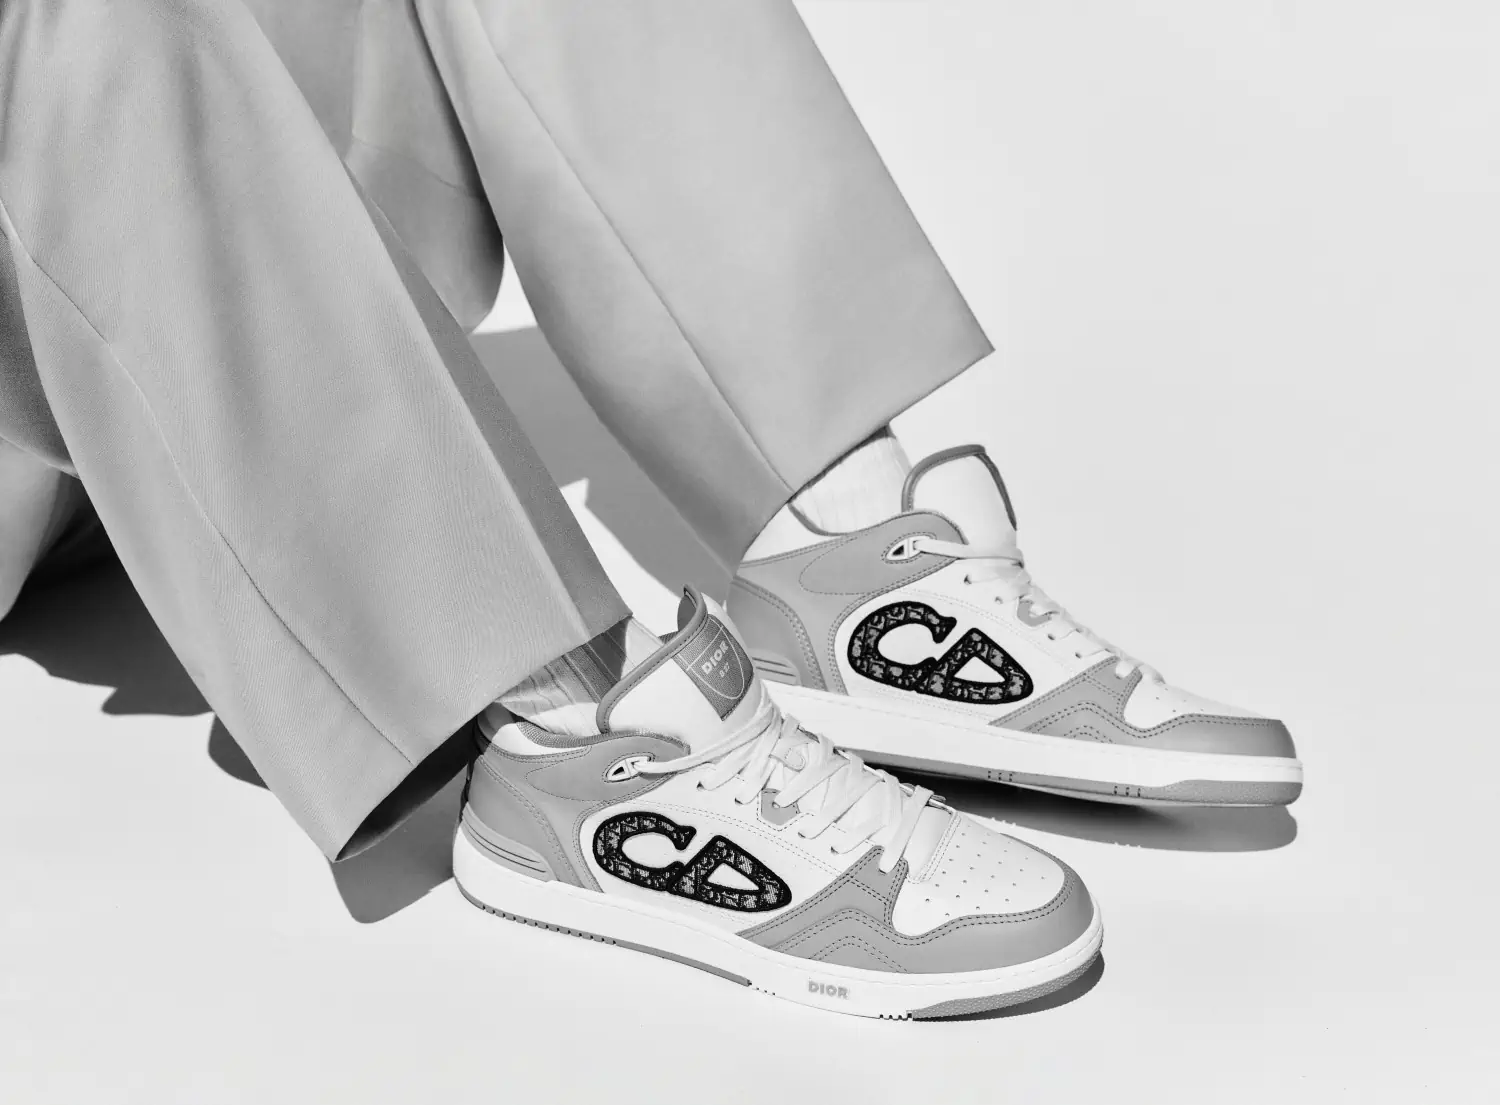 Dior B57 sneakers capture classic charm